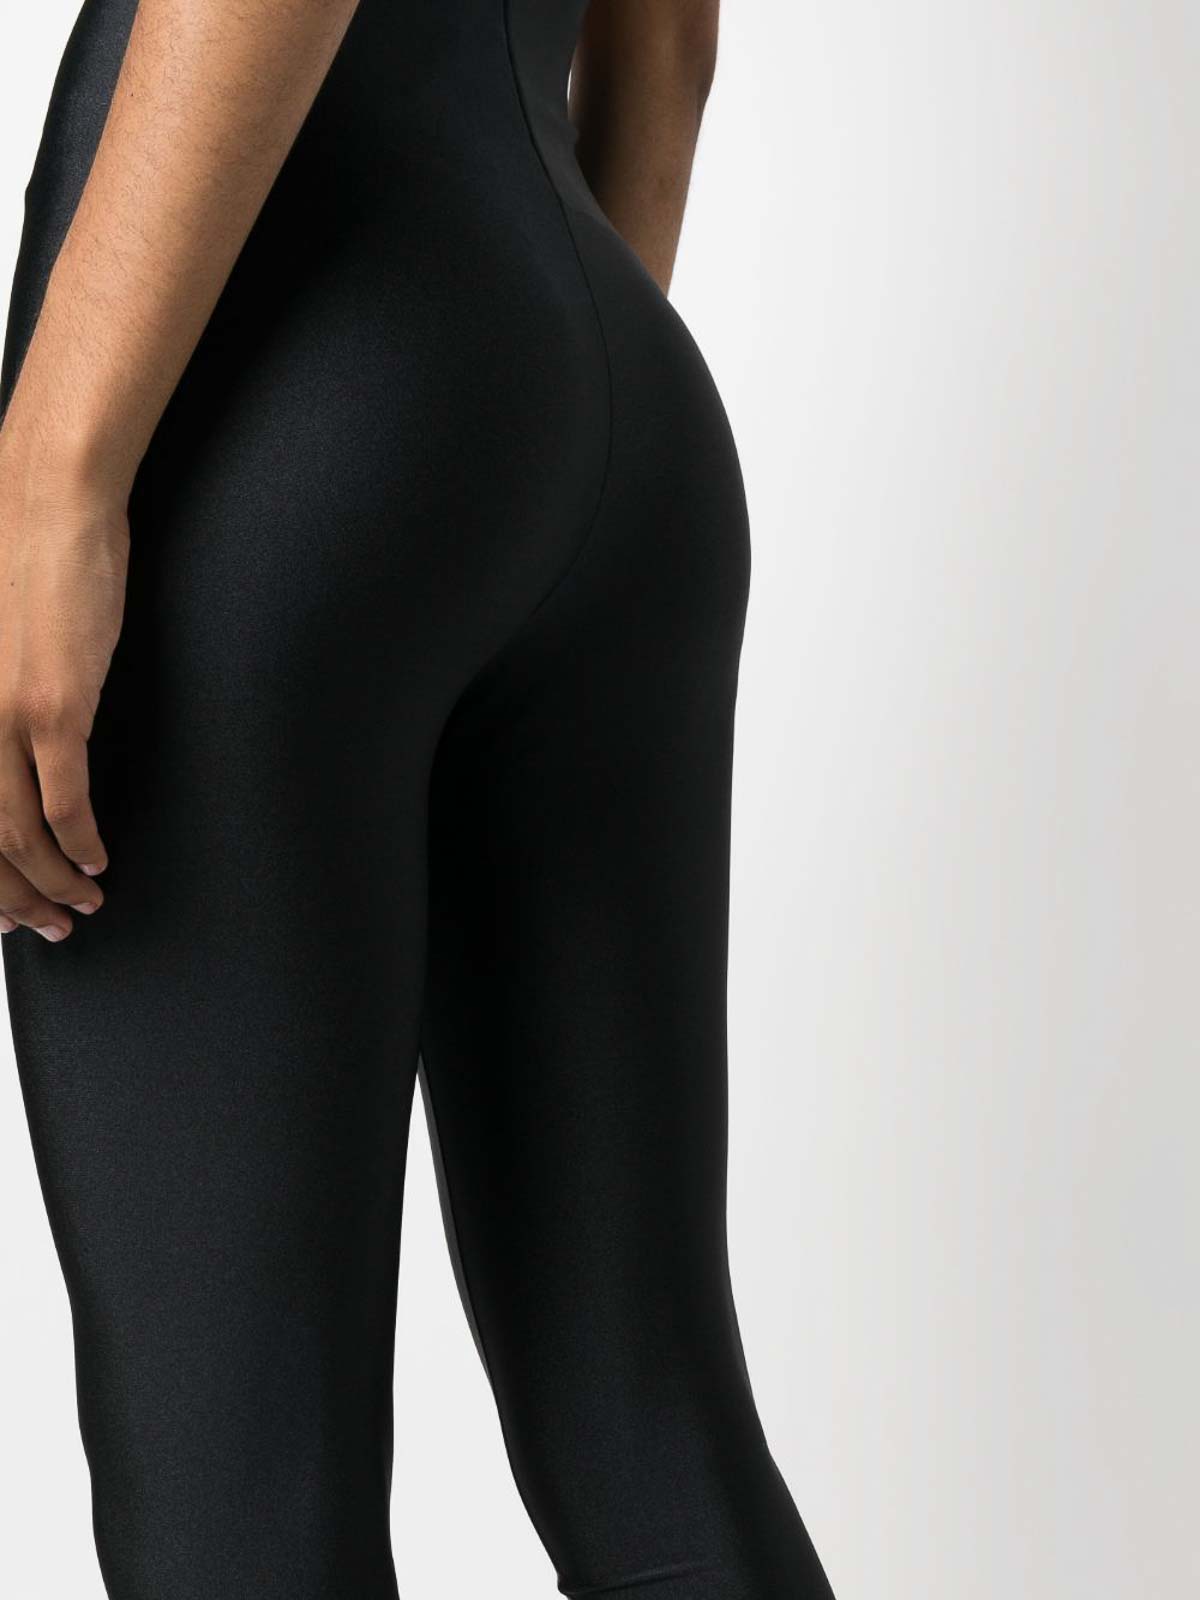 Buying Leggings Online: Your Ultimate Guide | Linions Activewear